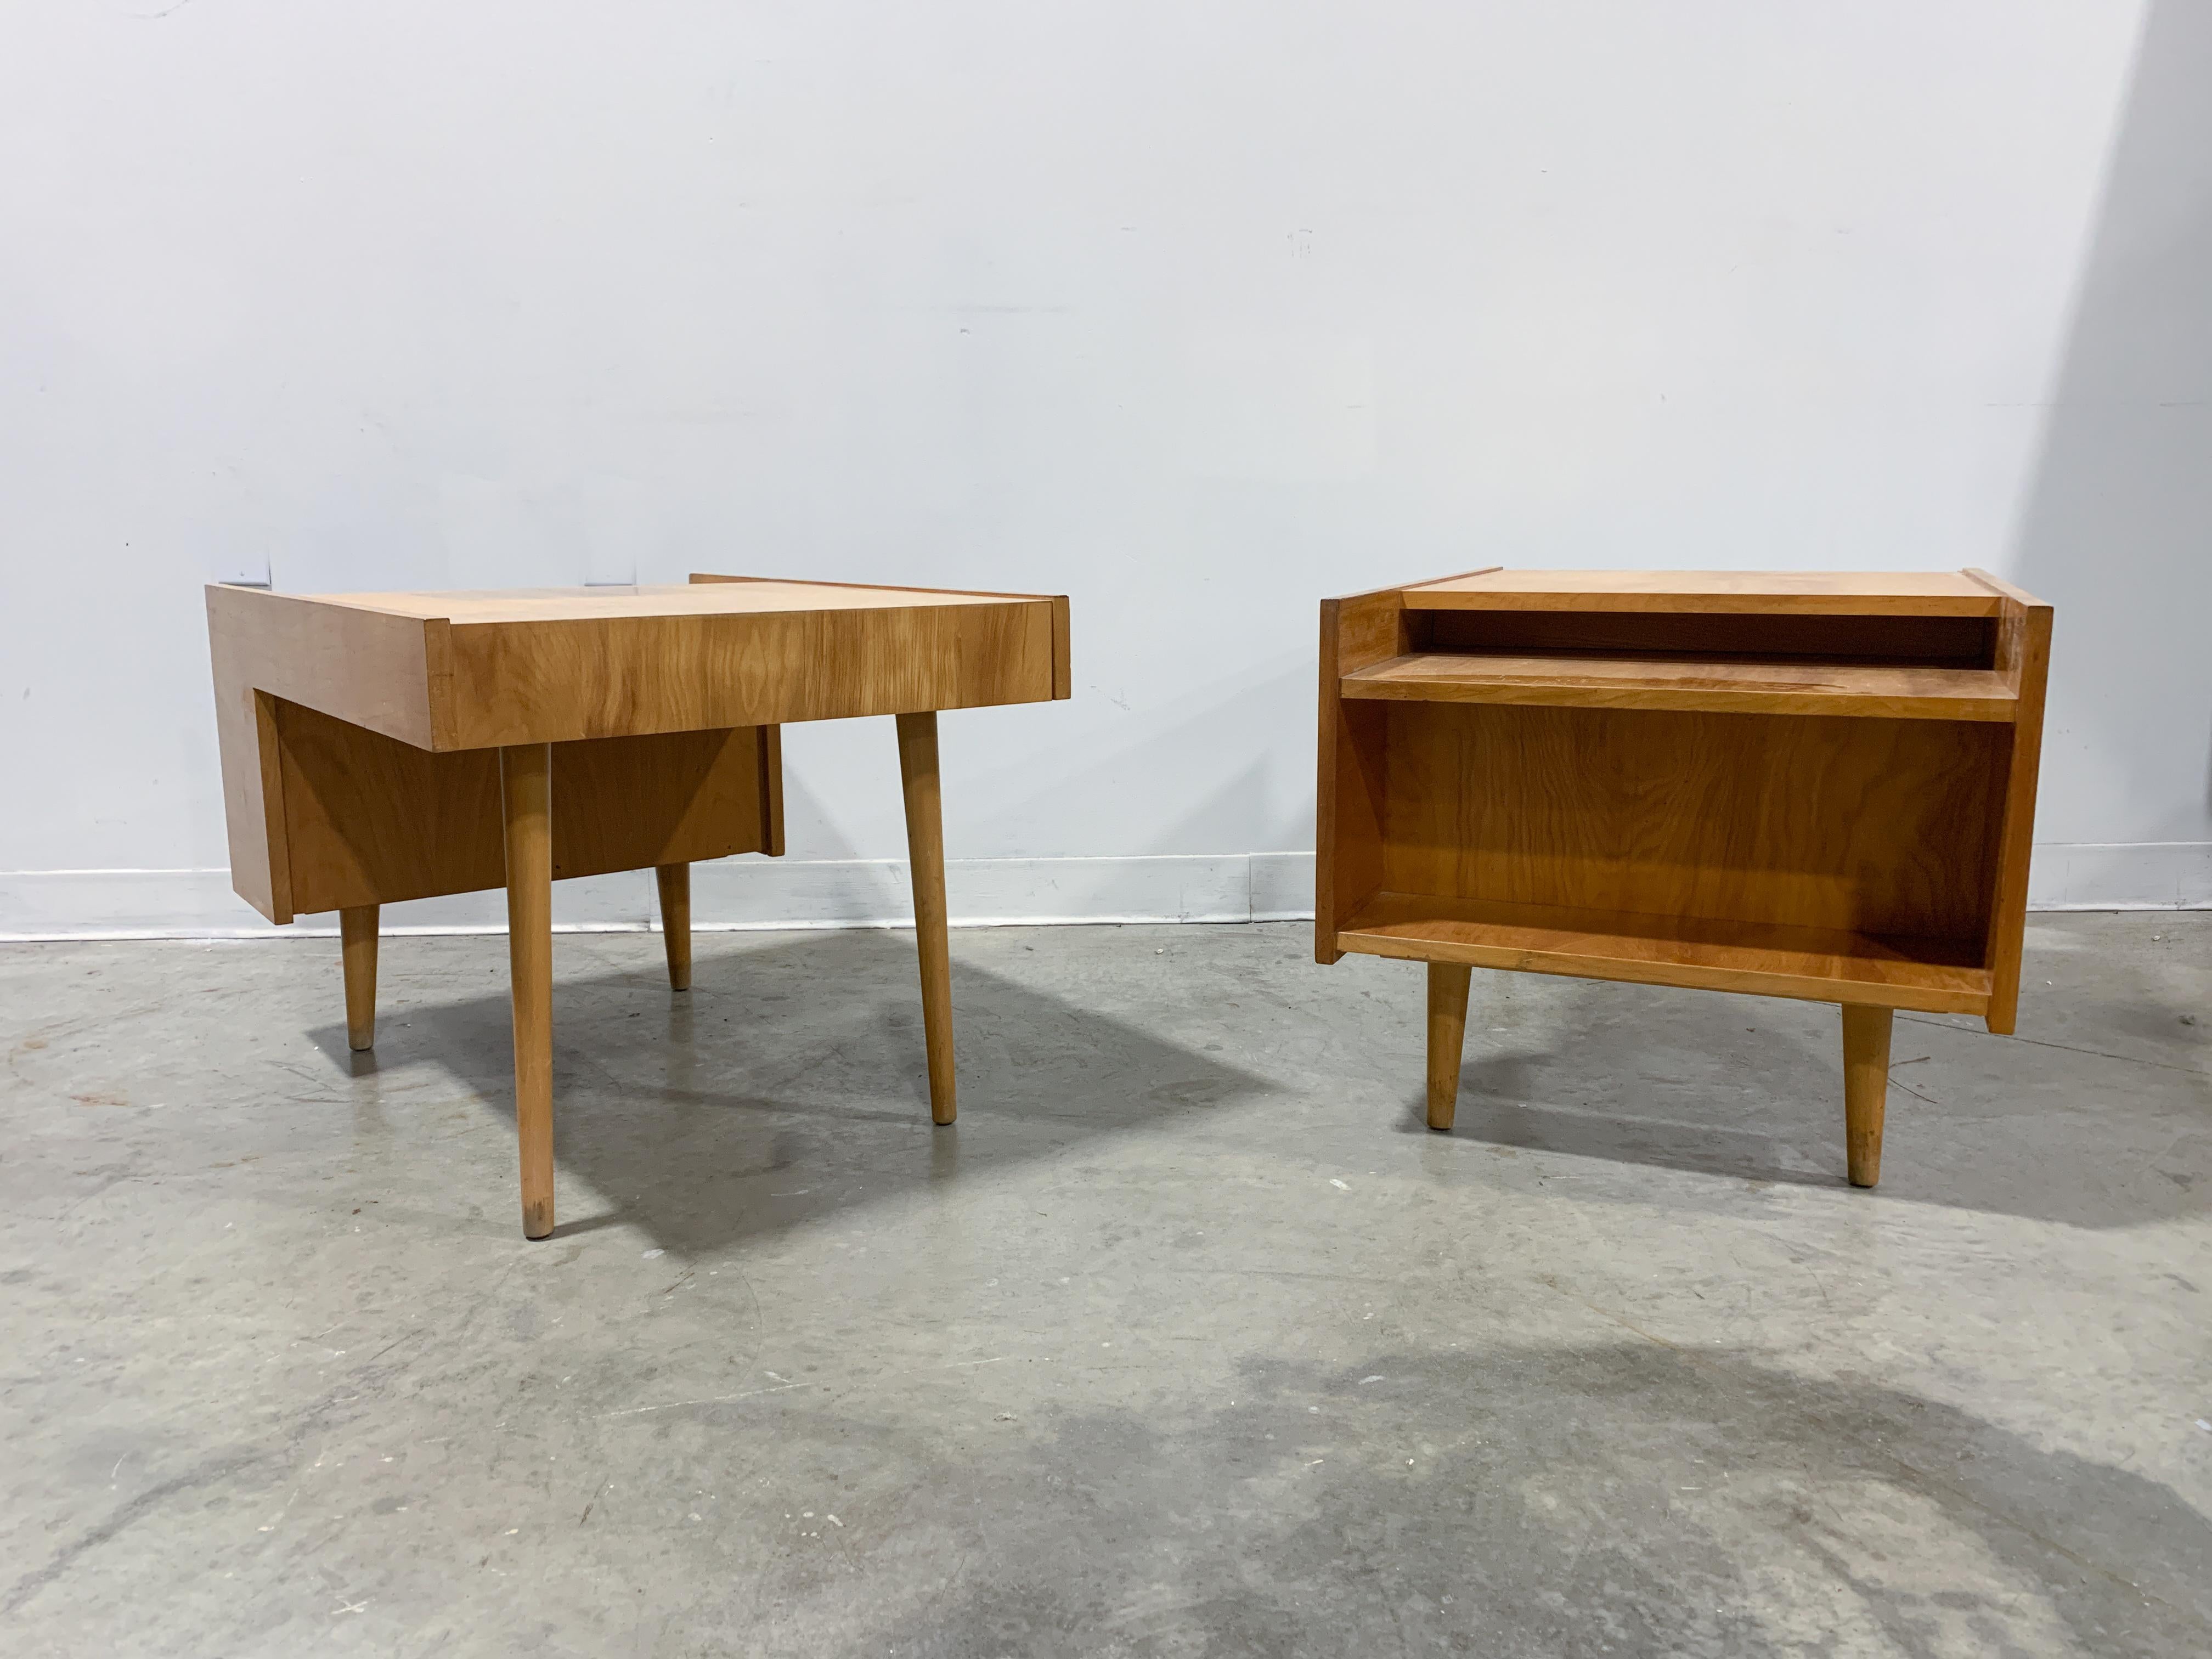 Early modern end tables with books shelves designed by Stanley Young for Glenn of California in the late 1940s -see the original advert from Arts and Architecture Magazine 1947. Sold as a pair.
 
Birch plywood construction and solid birch legs.